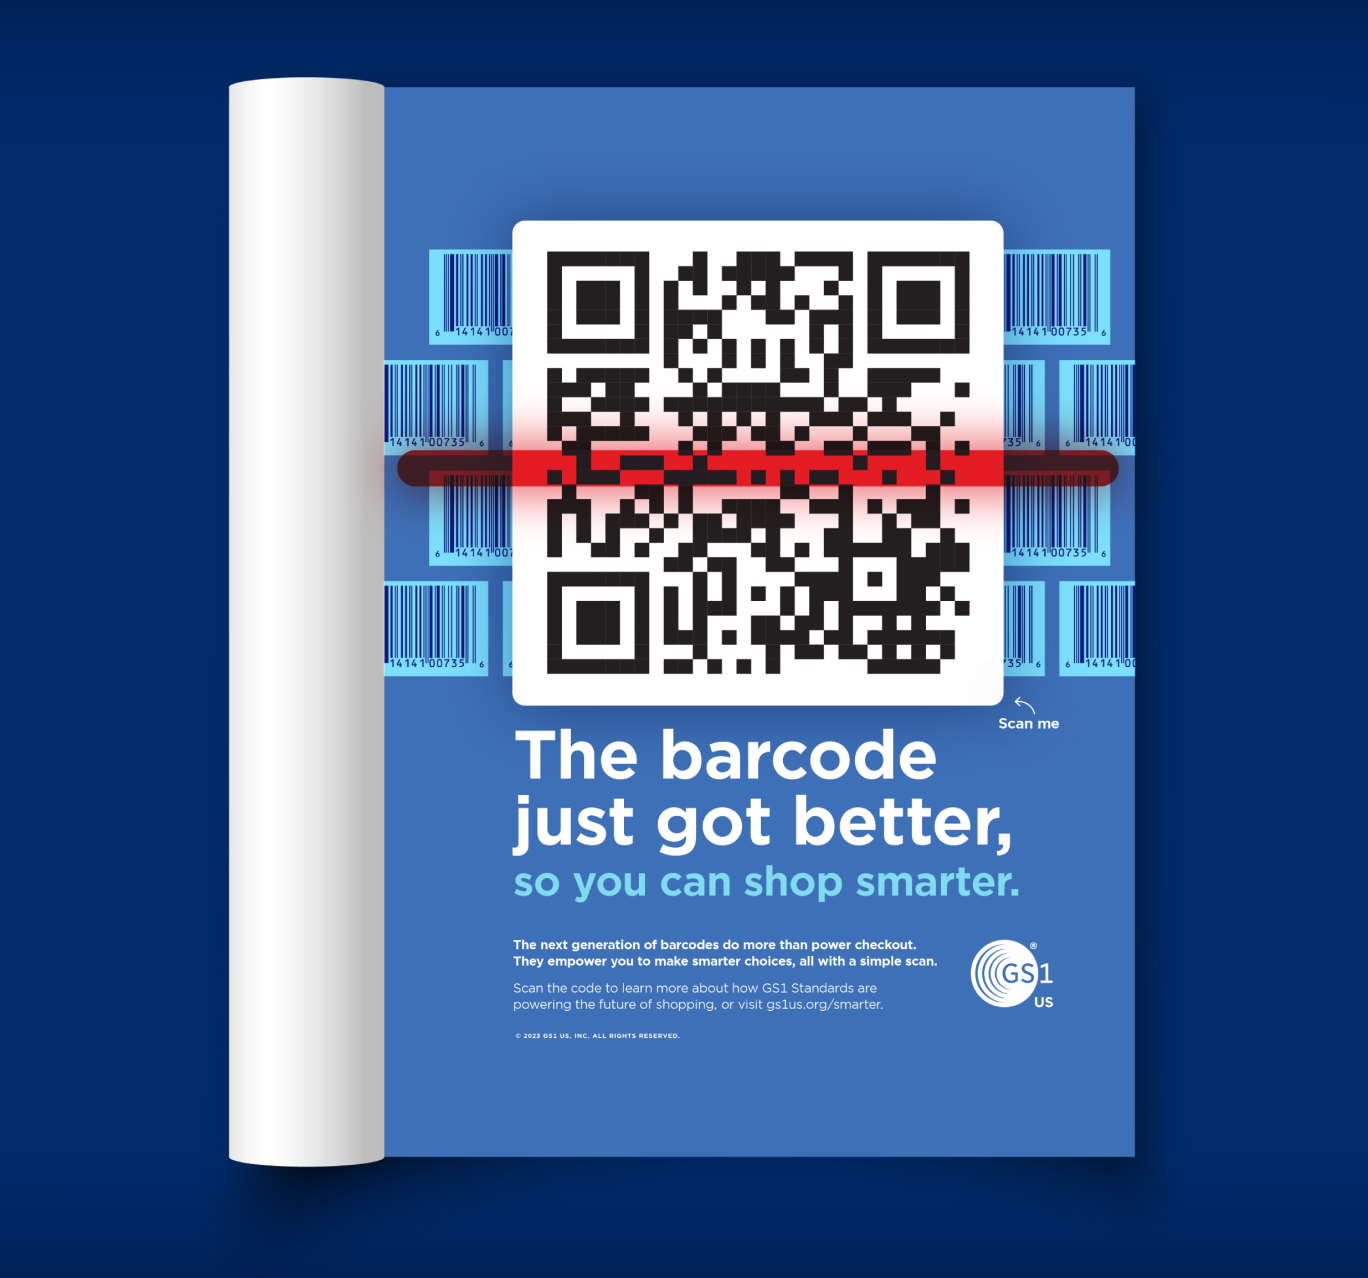 Design of GS1 ad mockup highlighting the change of a new digital barcode